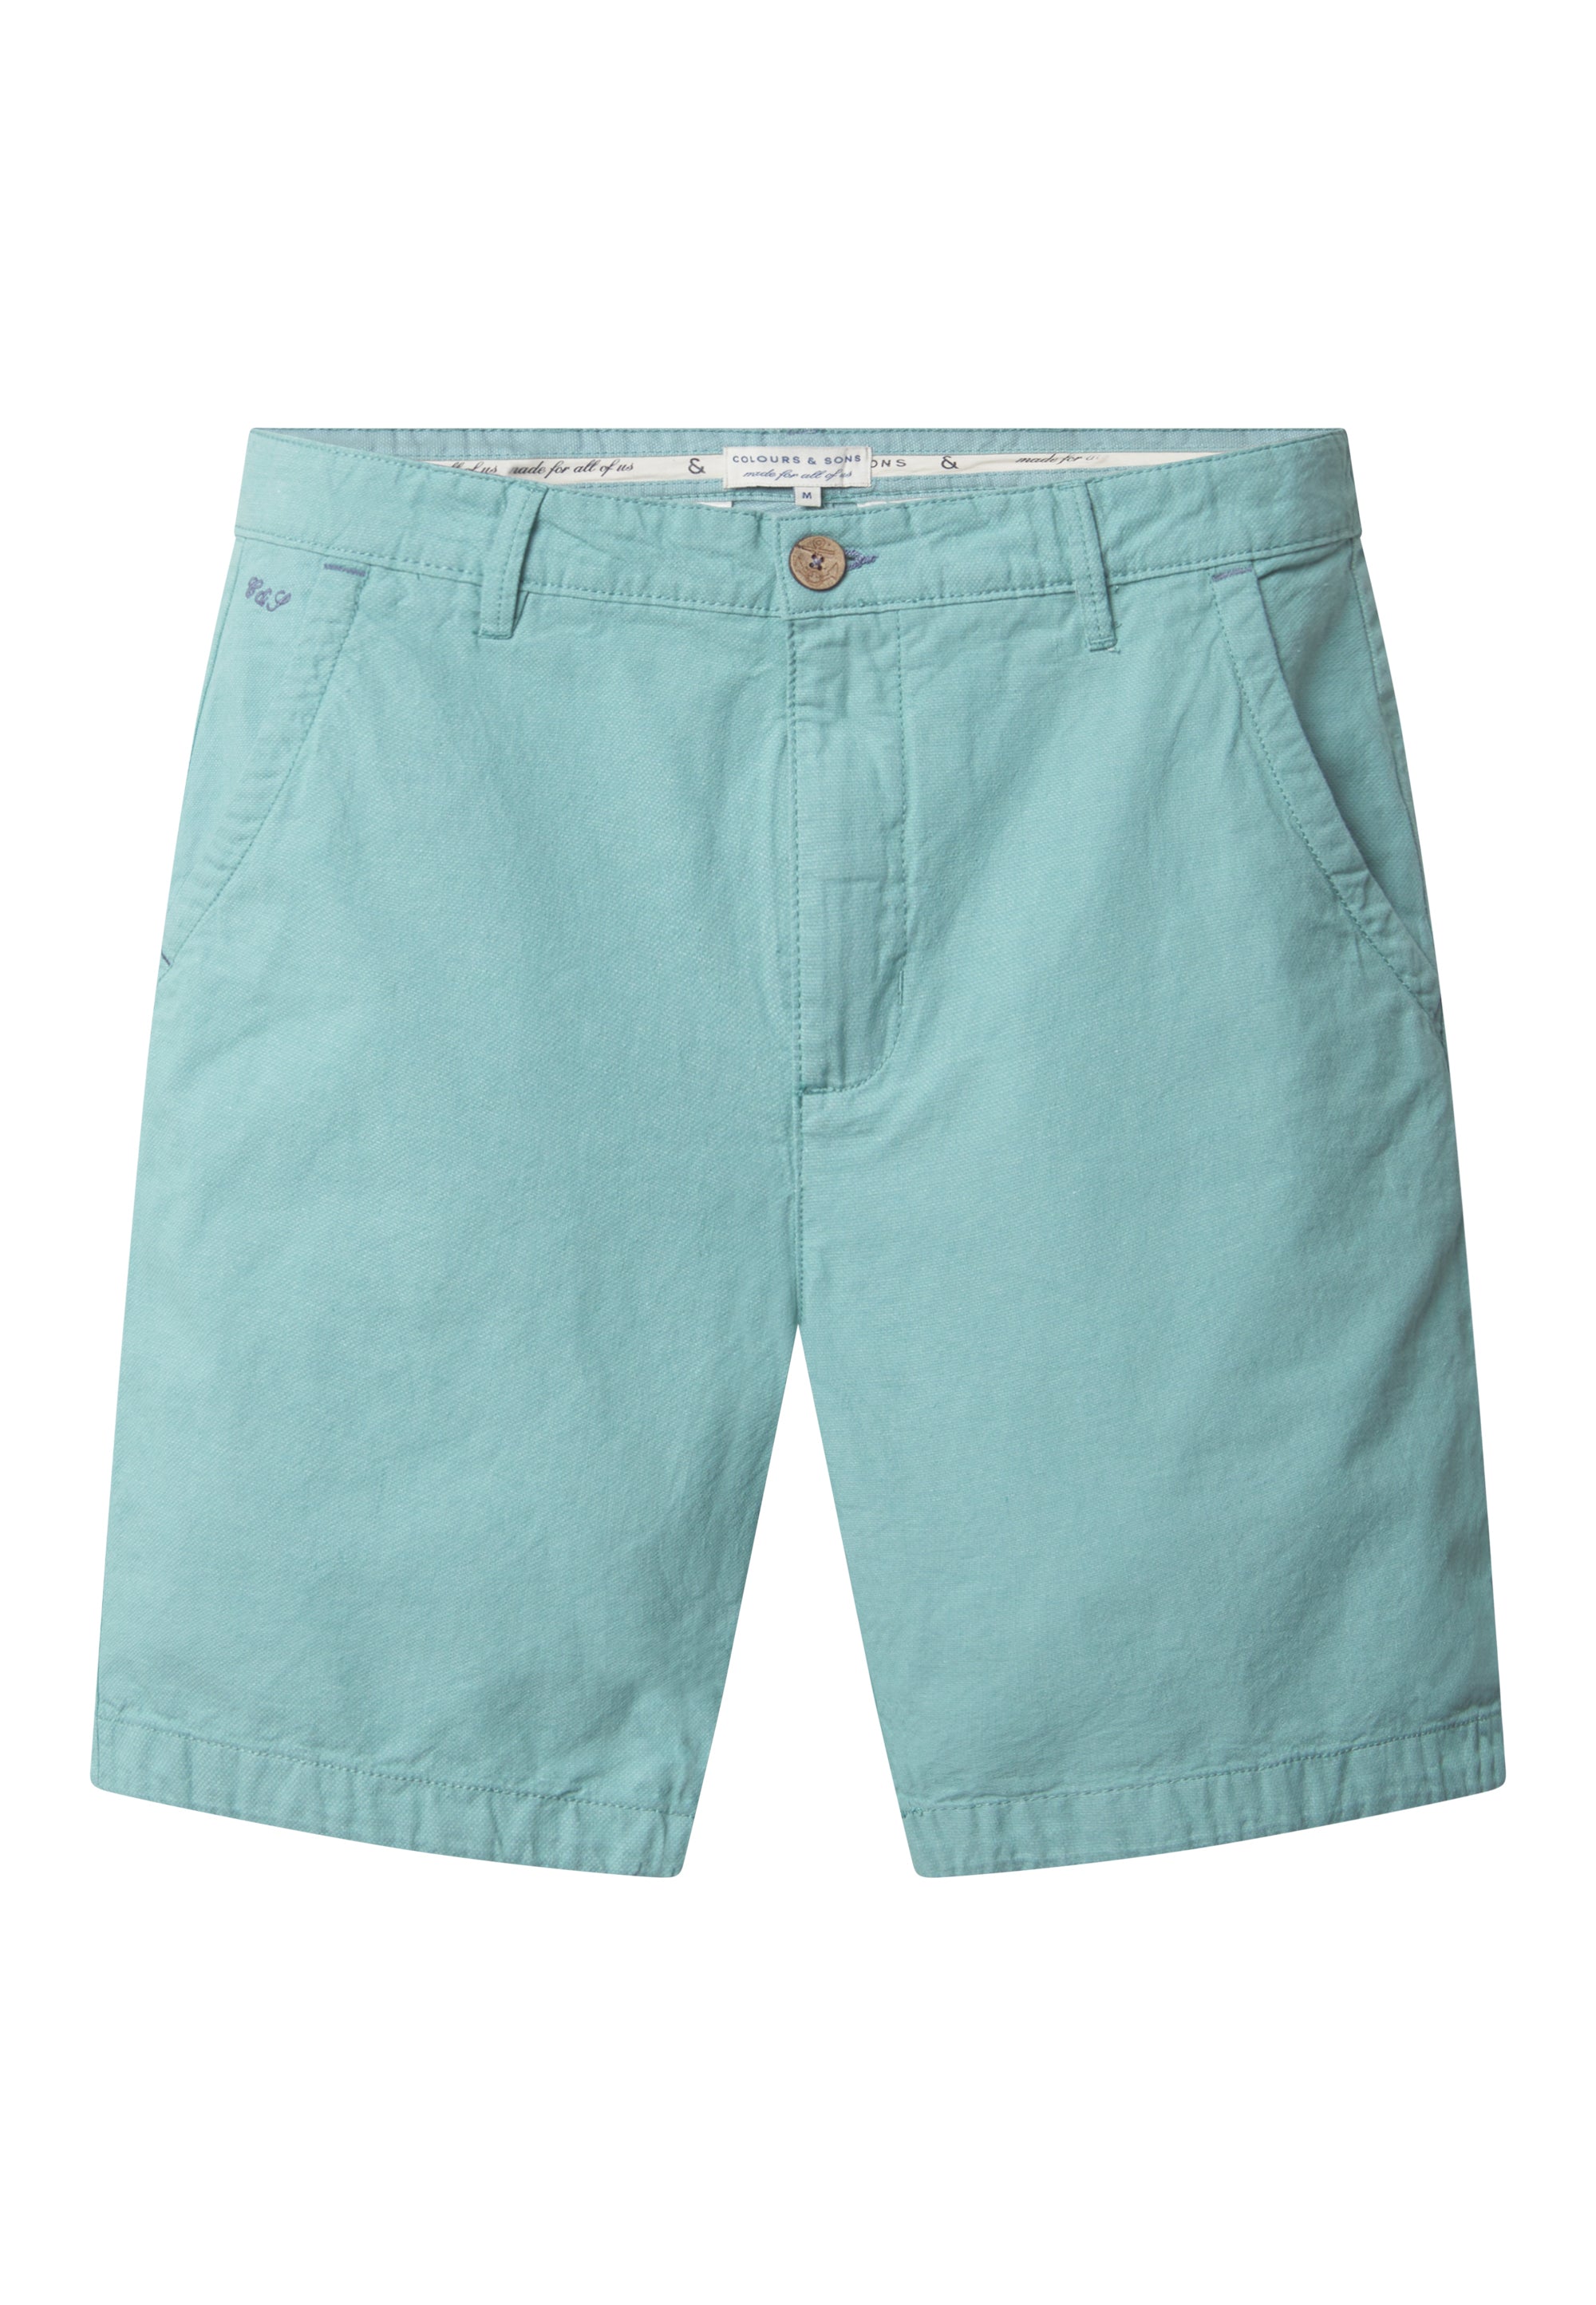 Shorts-Dobby in Teal Shorts Colours and Sons   